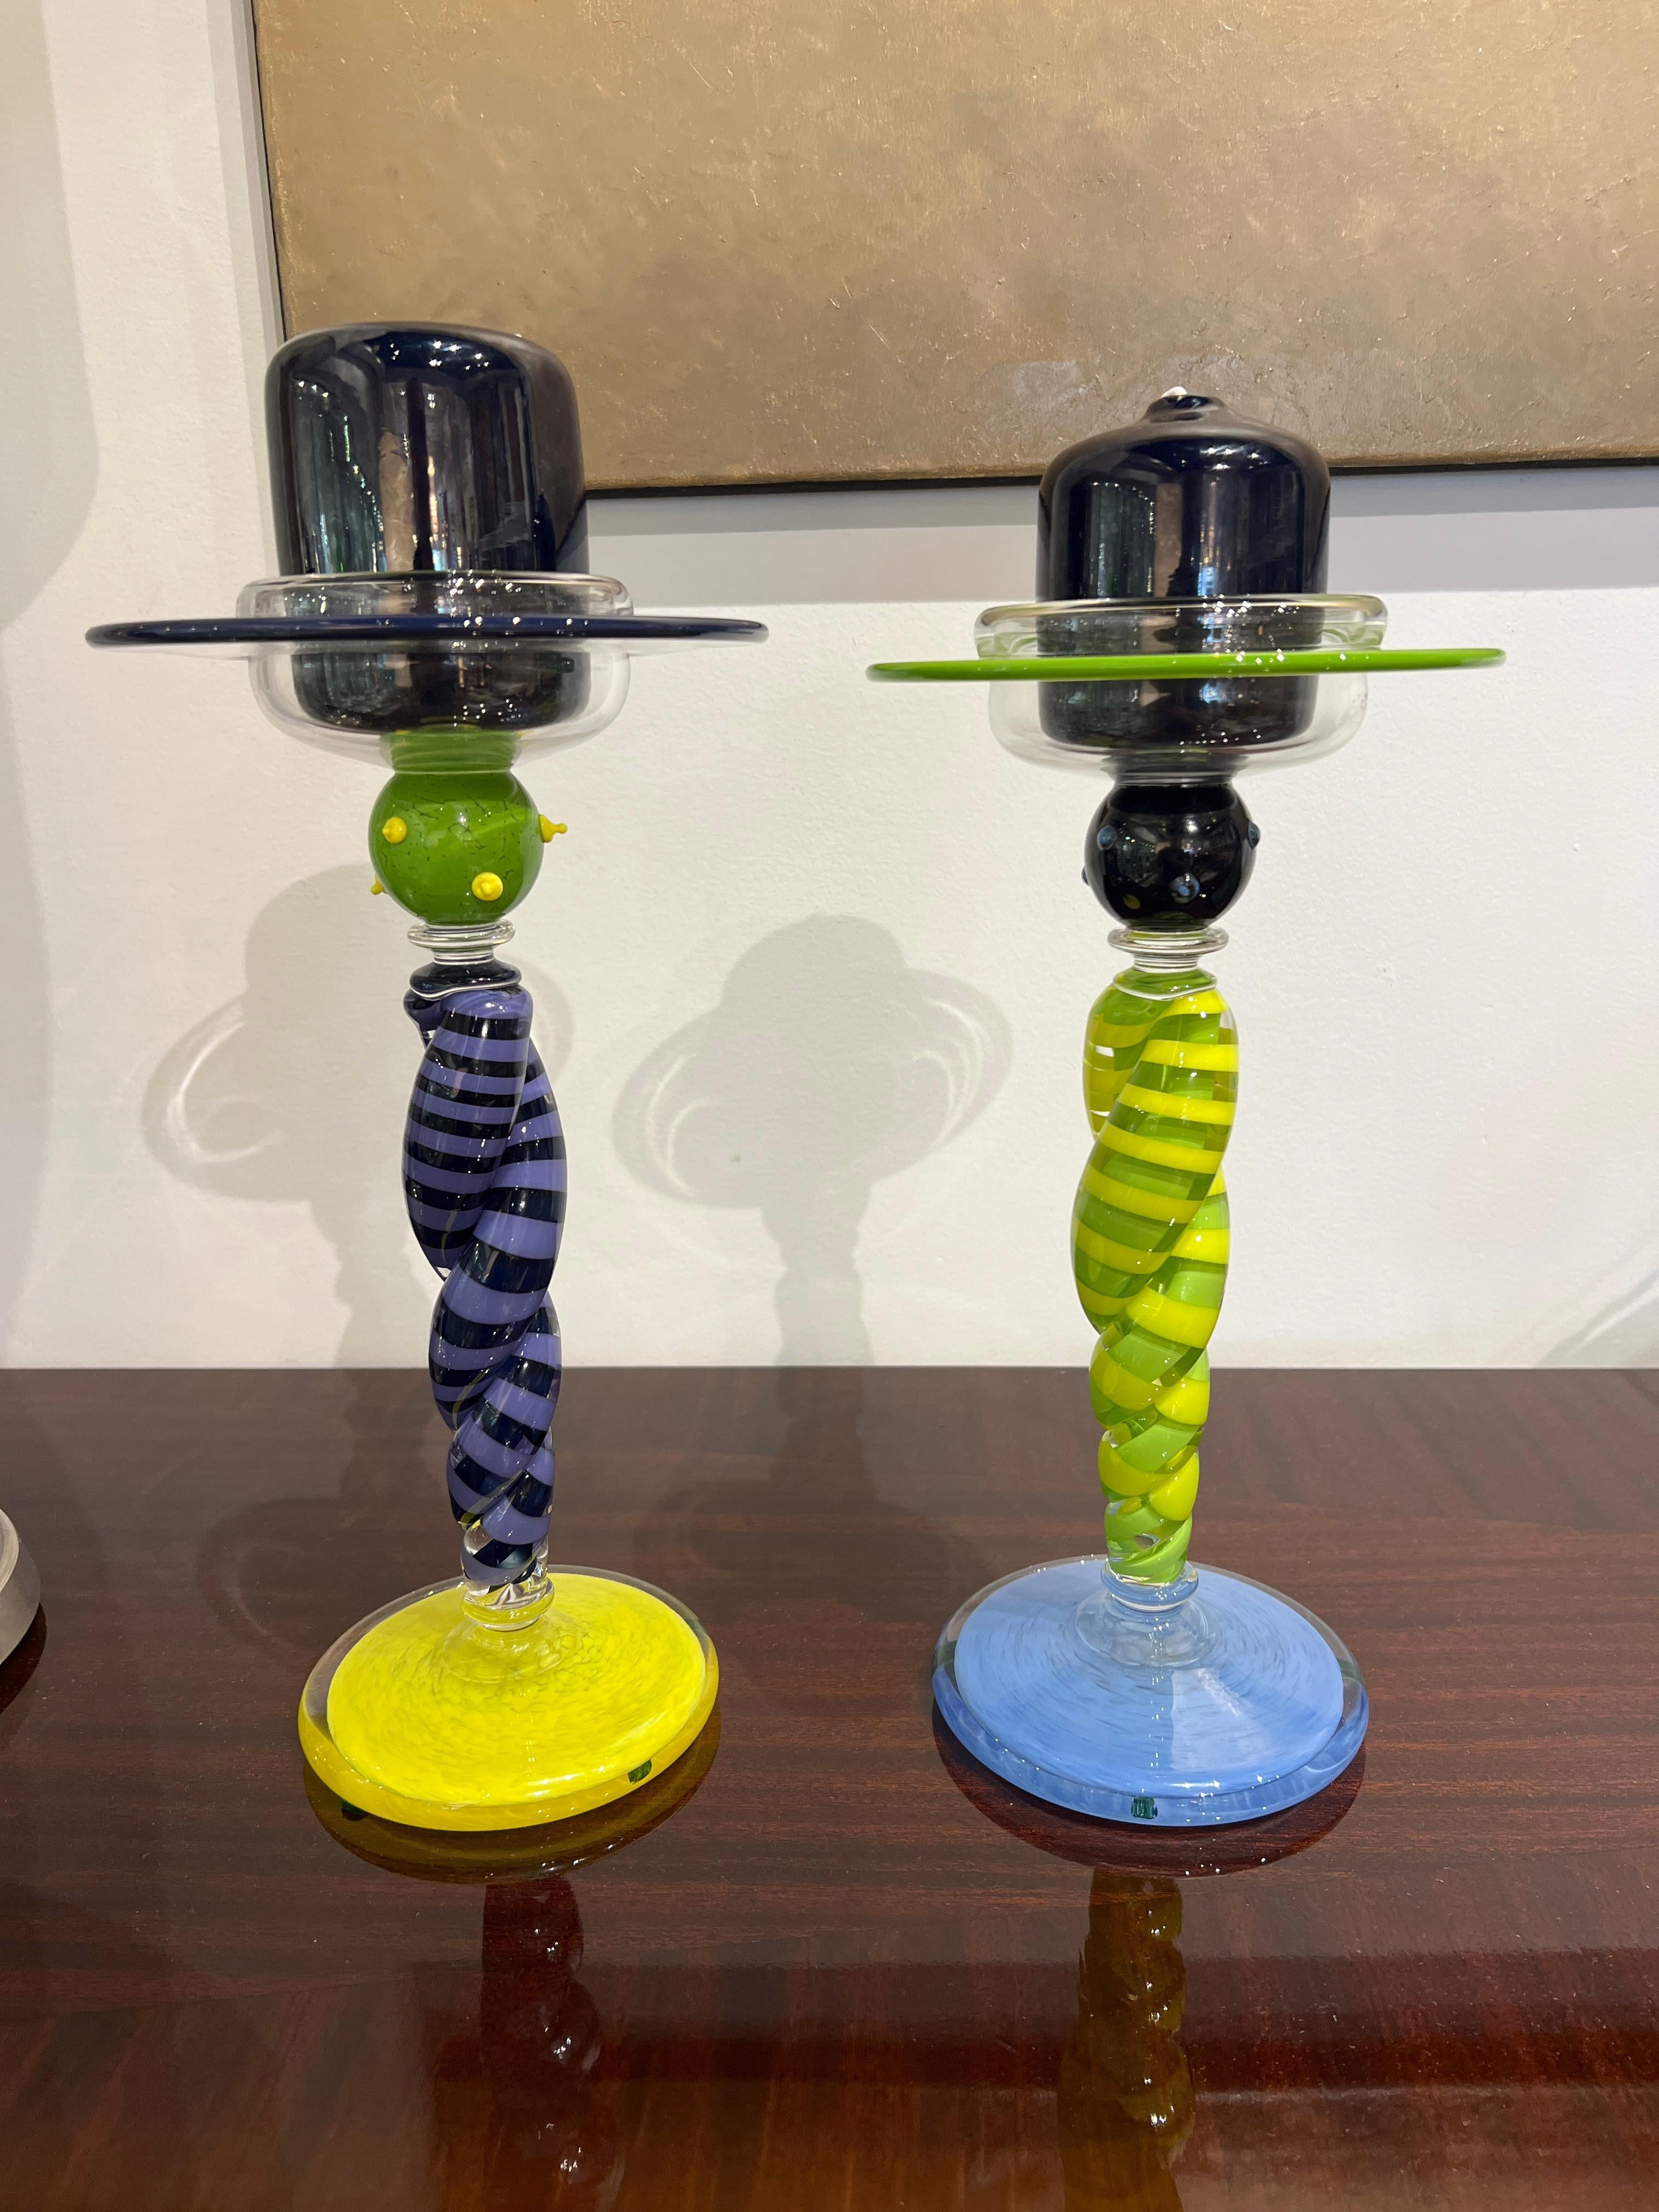 A pair of Contemporary Glass Candlesticks in Bright Colors Shaft (Purple, Blue, Green and Yellow) and Yellow foot.  The Glass candle pilar is in Black.

Signature: Cray